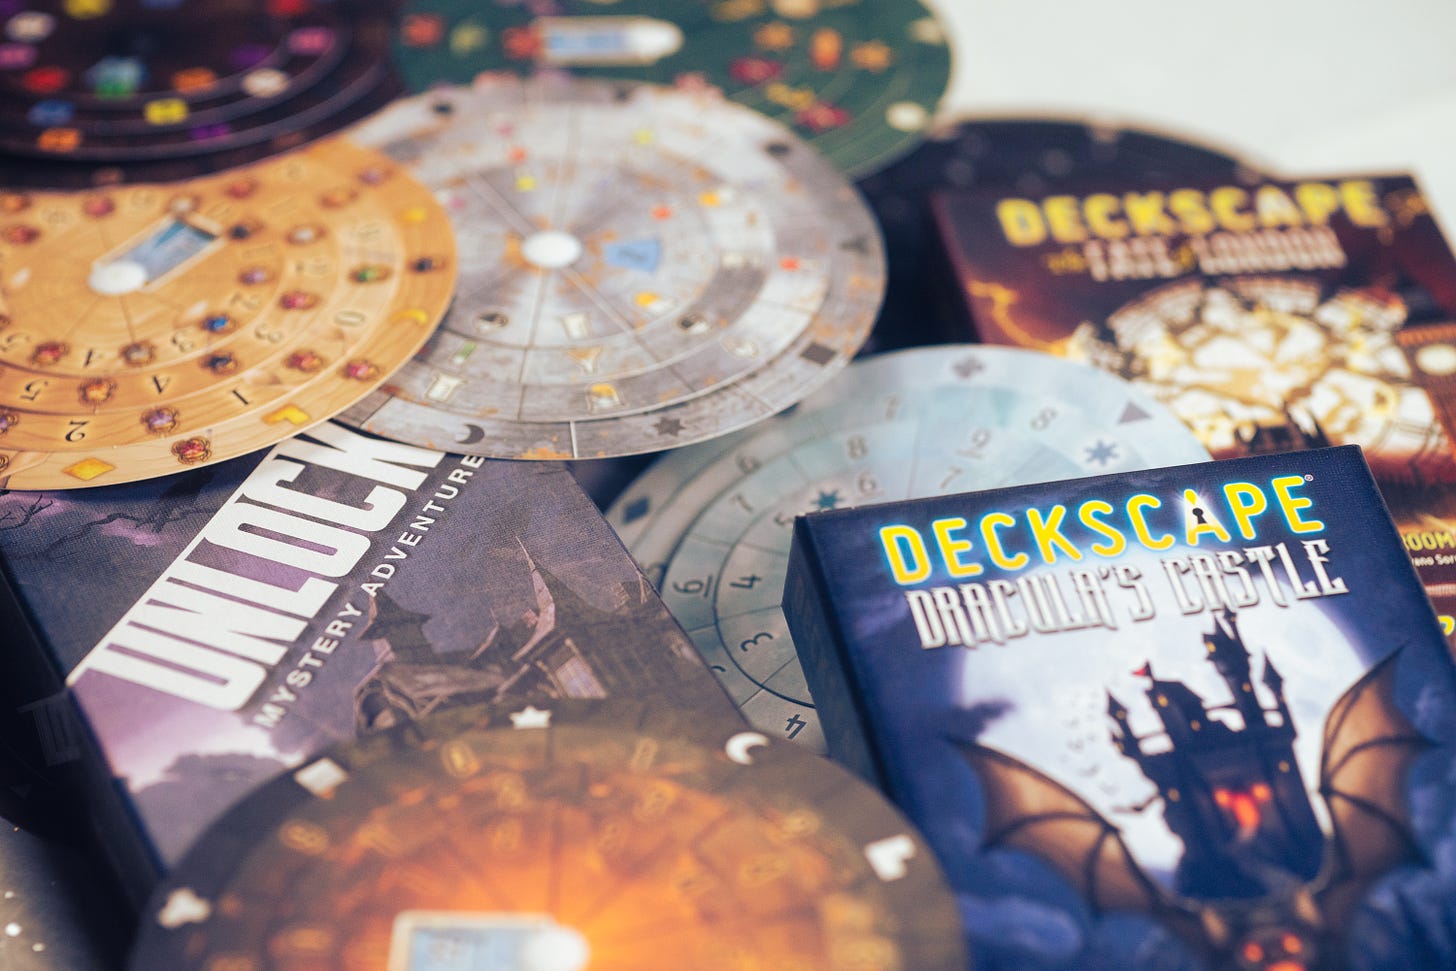 Decoder wheels from the Exit: the Game series, plus Unlock and Deckscape boxes